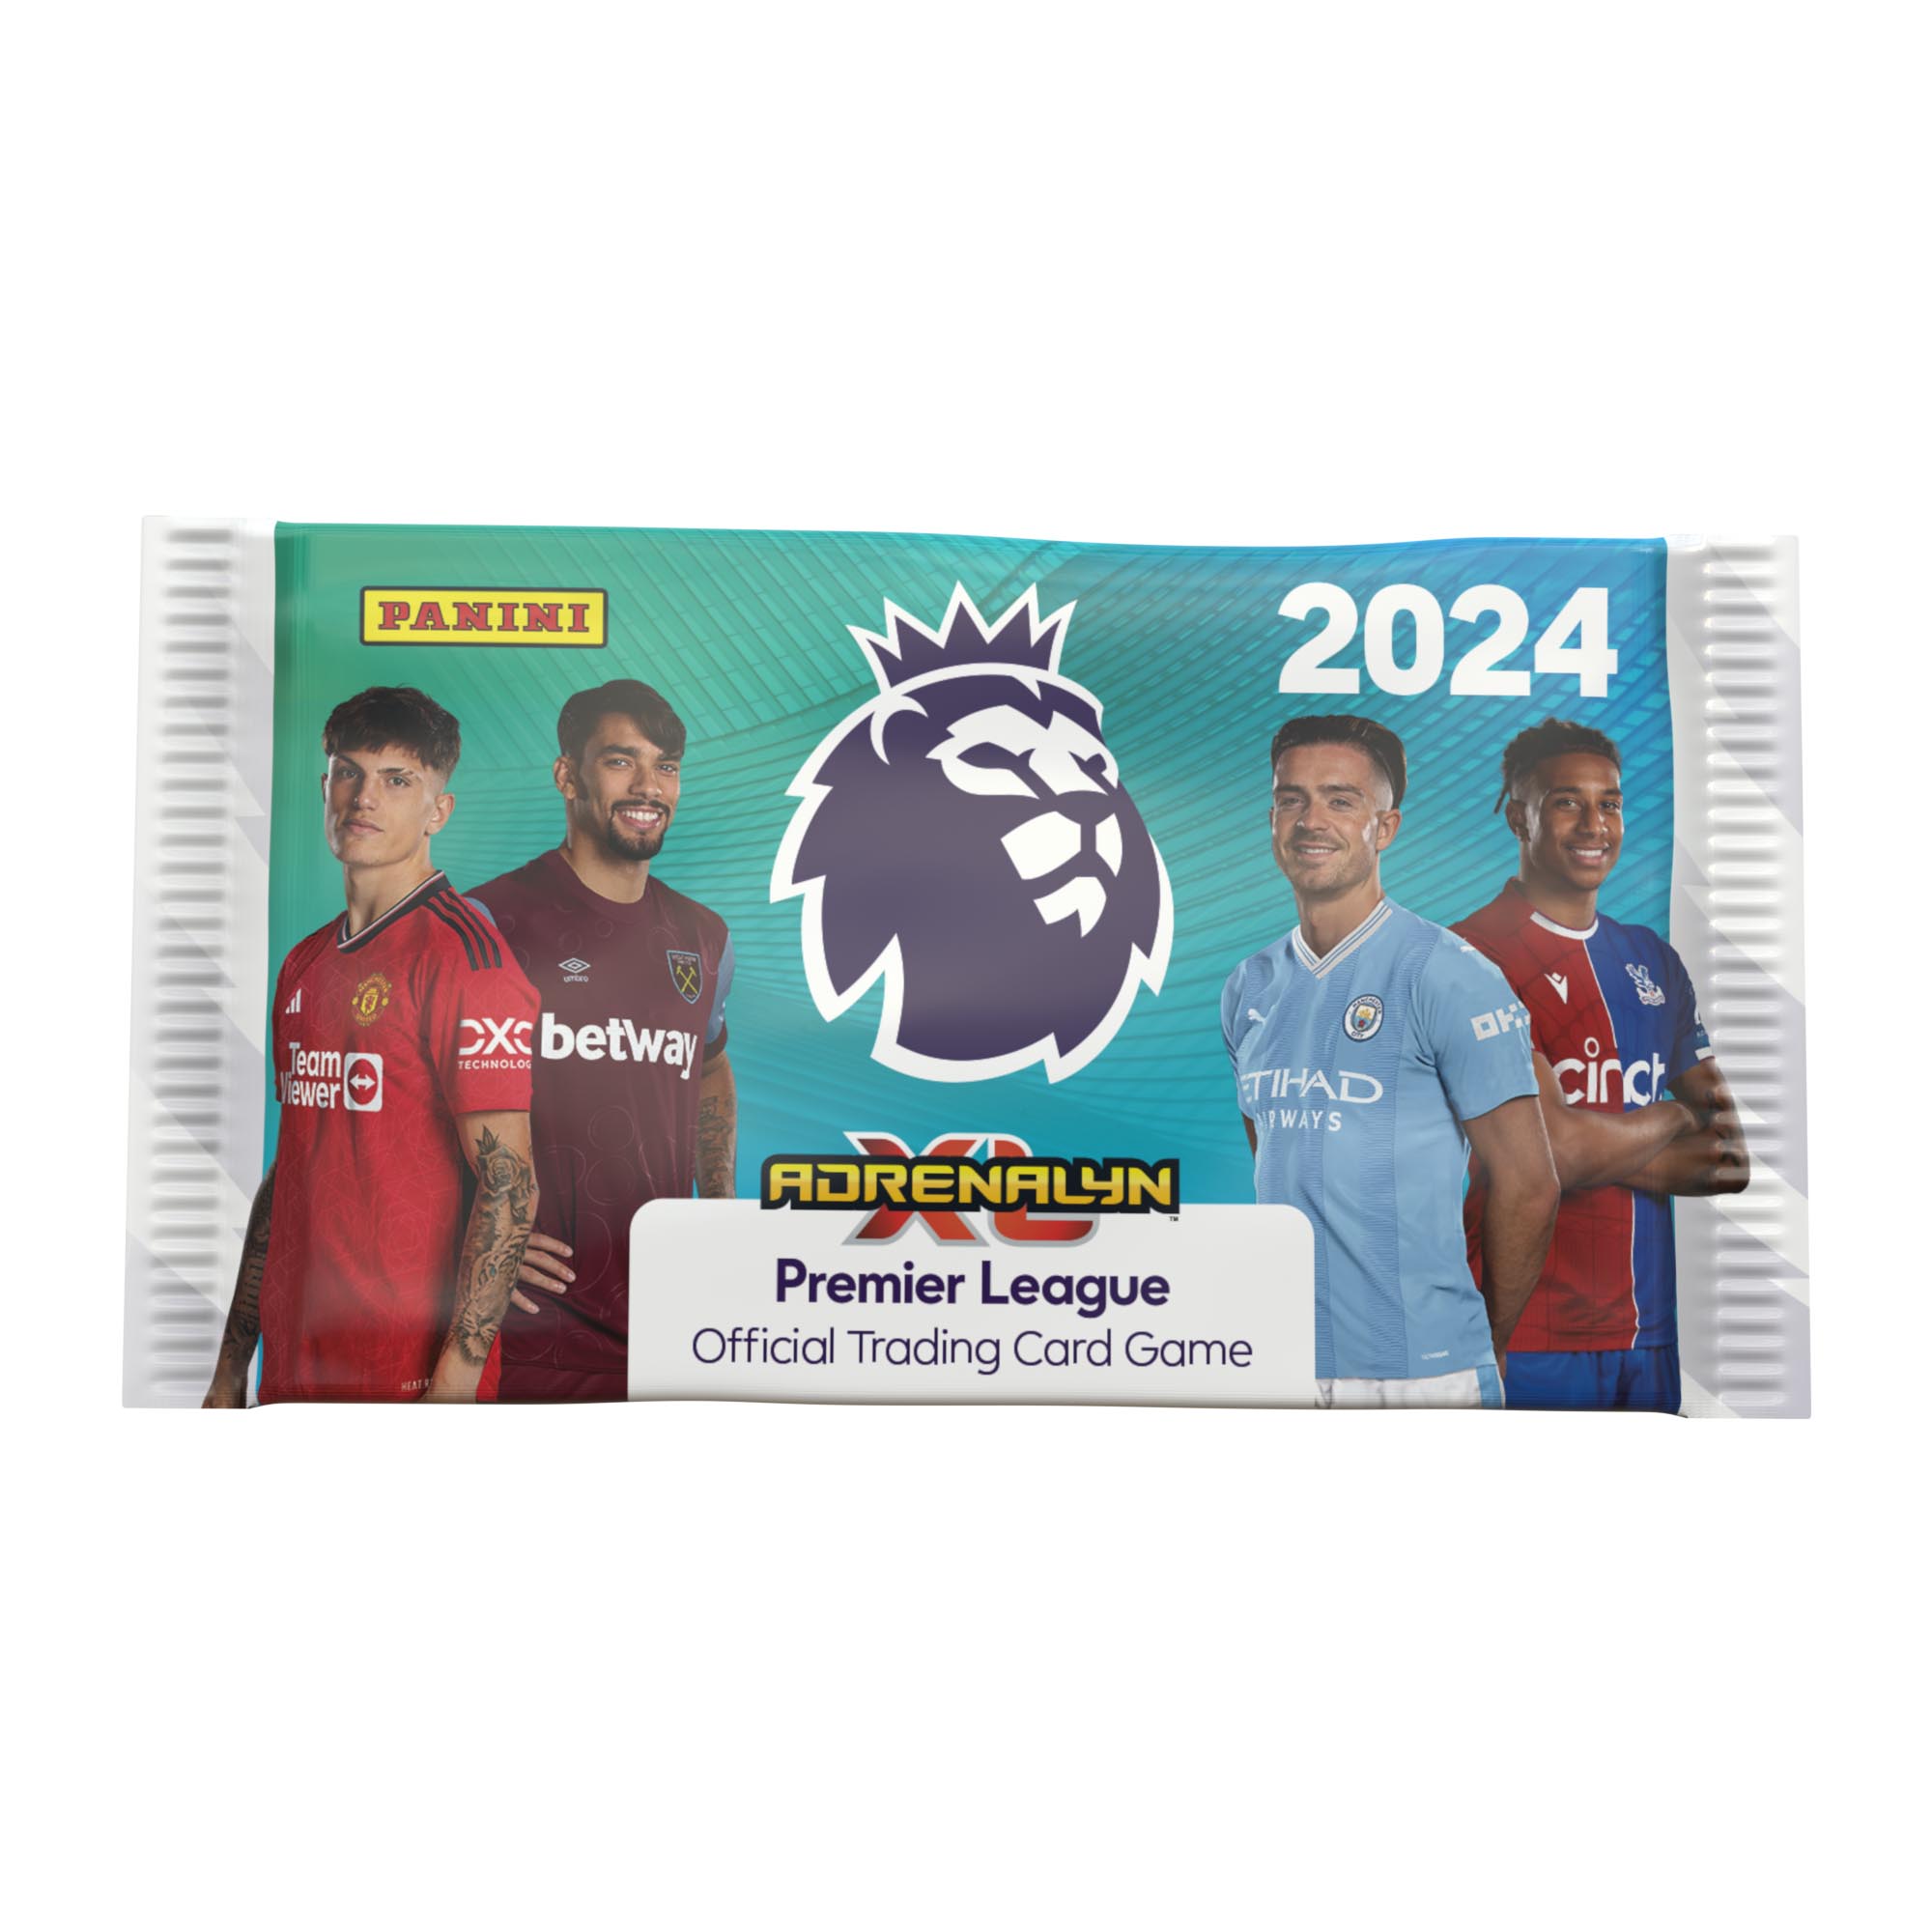 2023-24 PANINI ADRENALYN XL PREMIER LEAGUE CARDS - COUNTDOWN CALENDAR (132 CARDS) (IN STOCK OCT 15)